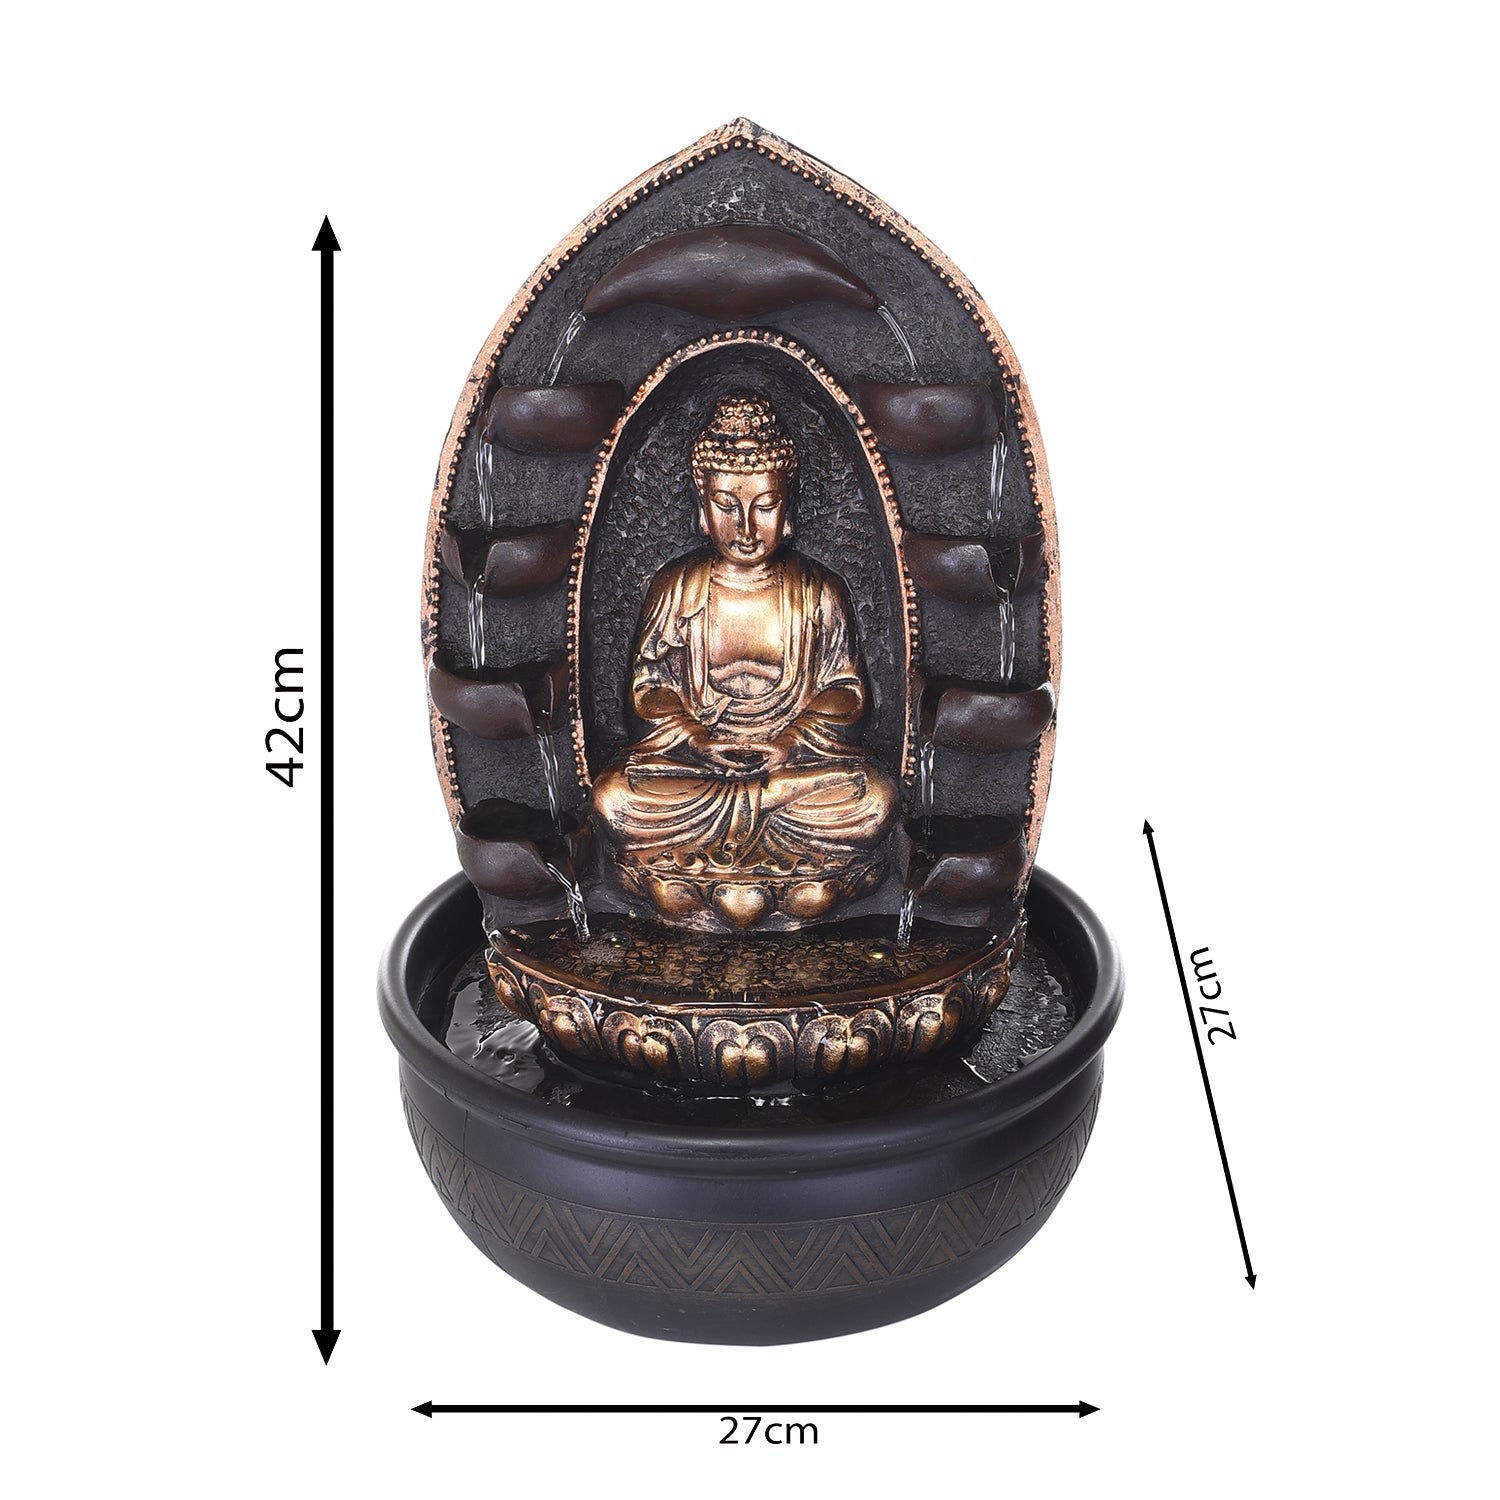 Polystone Brown and Golden Lotus Meditating Buddha Idol Water Fountain With Crystal Ball for Home/Office Decor 1